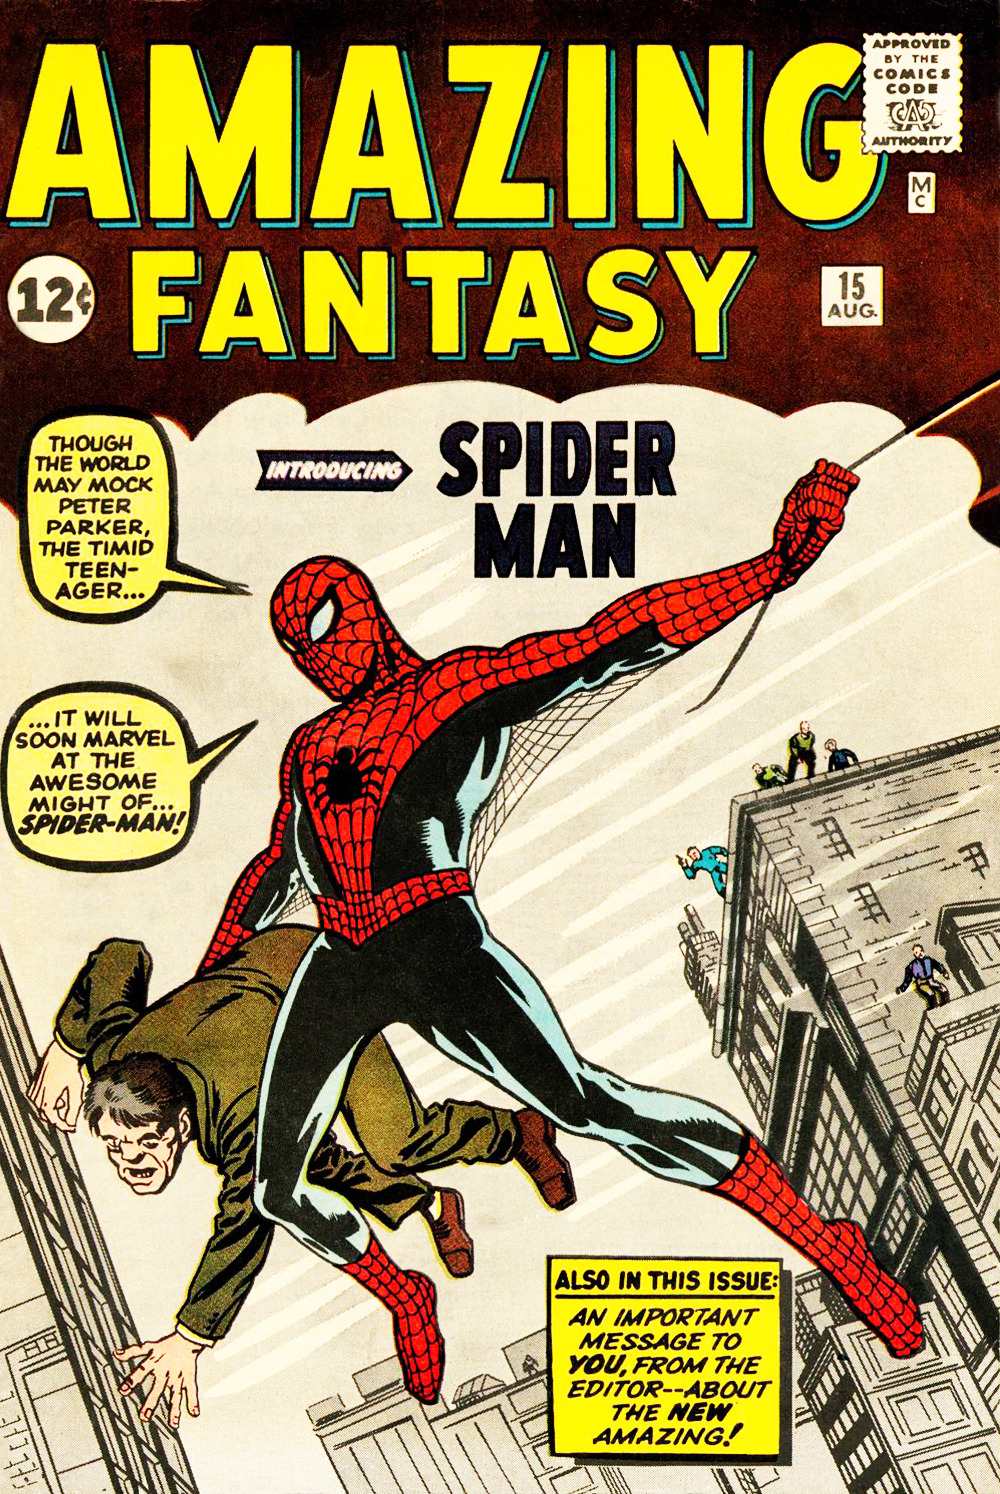 Read Comics Online Free - Spider-Man Origins (1962) Comic Book Issue #001 -  Page 1